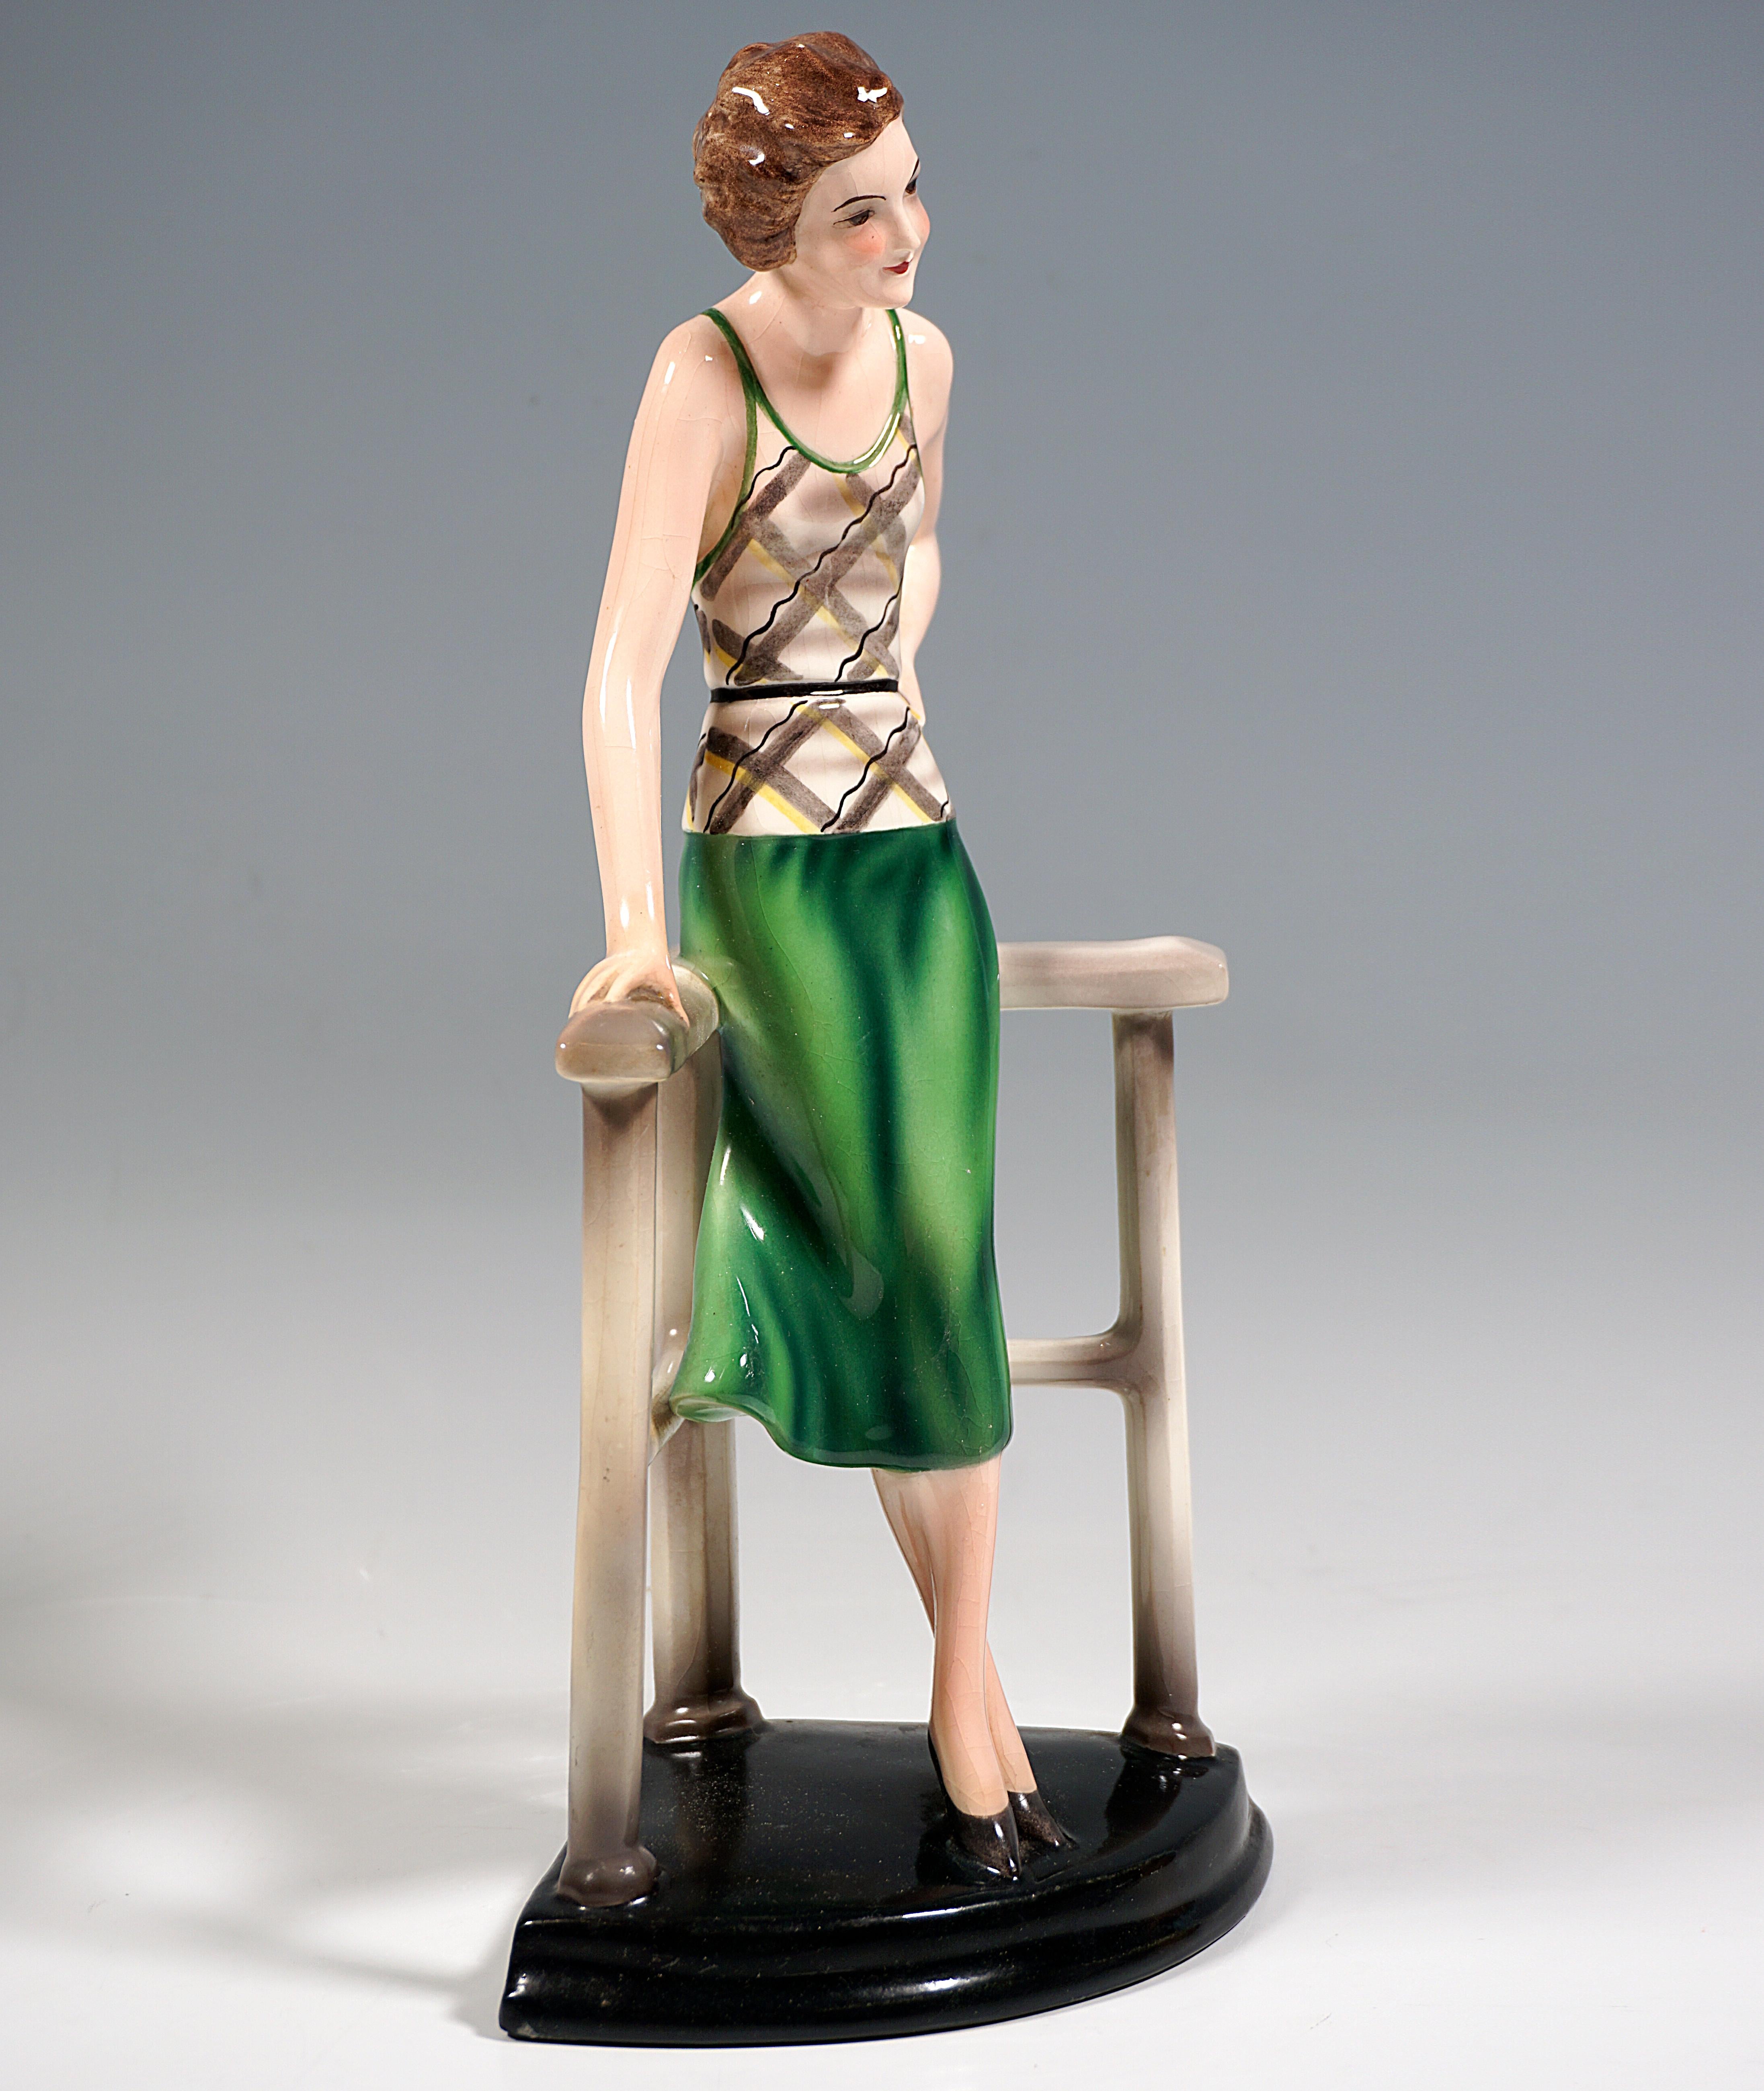 Very Rare Goldscheider Vienna Ceramic Figurine of the 1930s:
Standing young lady with brunette, chin-length curly hair in beige and gray plaid low-back top with green straps and green skirt, legs crossed and left hand on hip, leaning casually